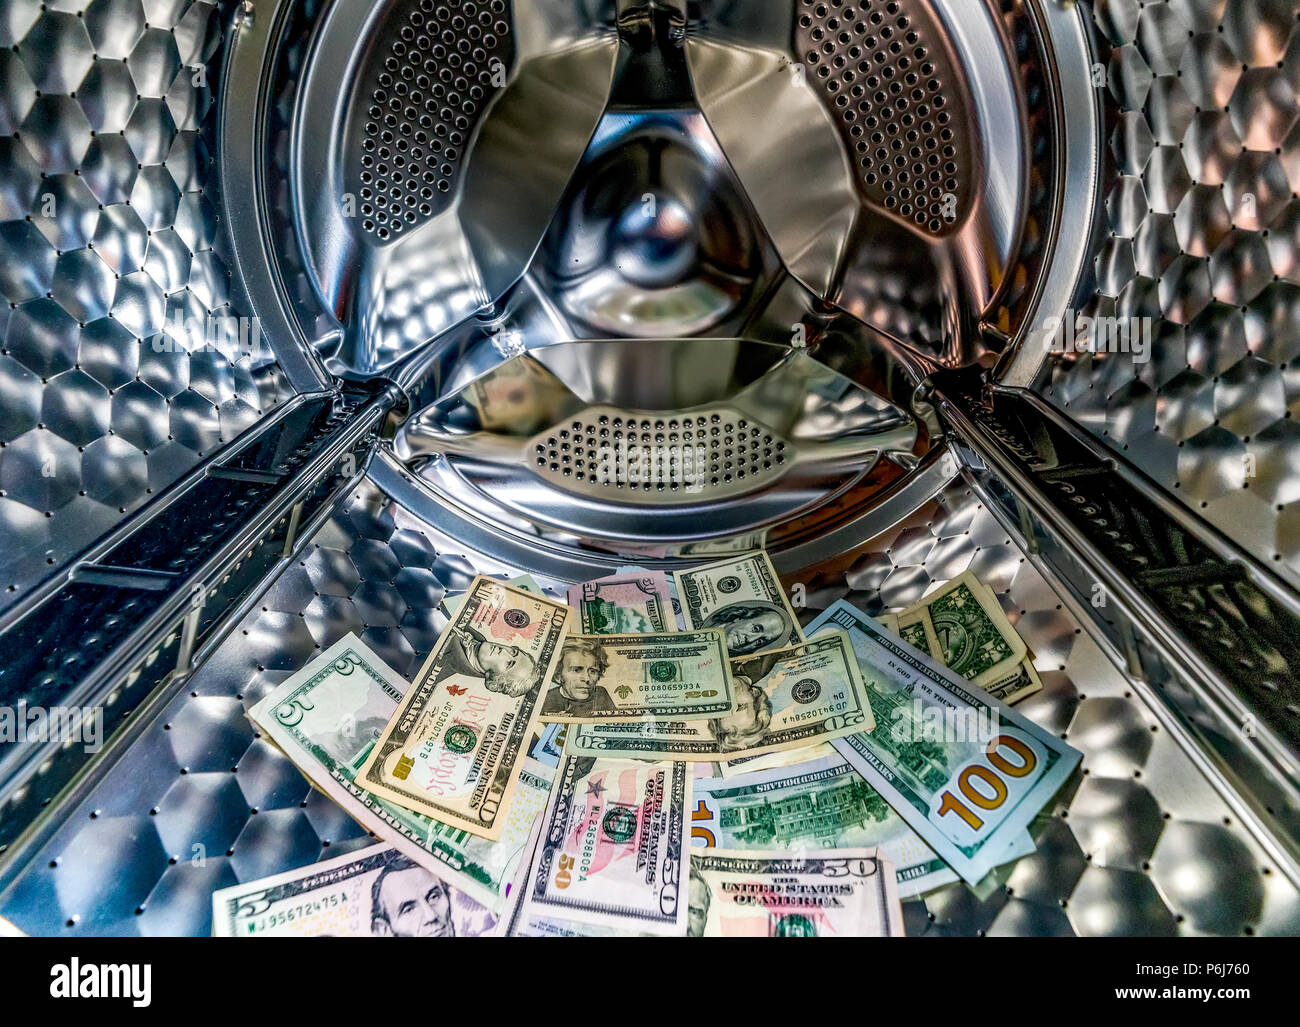 Money laundering symbol, US dollar banknotes in washing machine with the door open Stock Photo